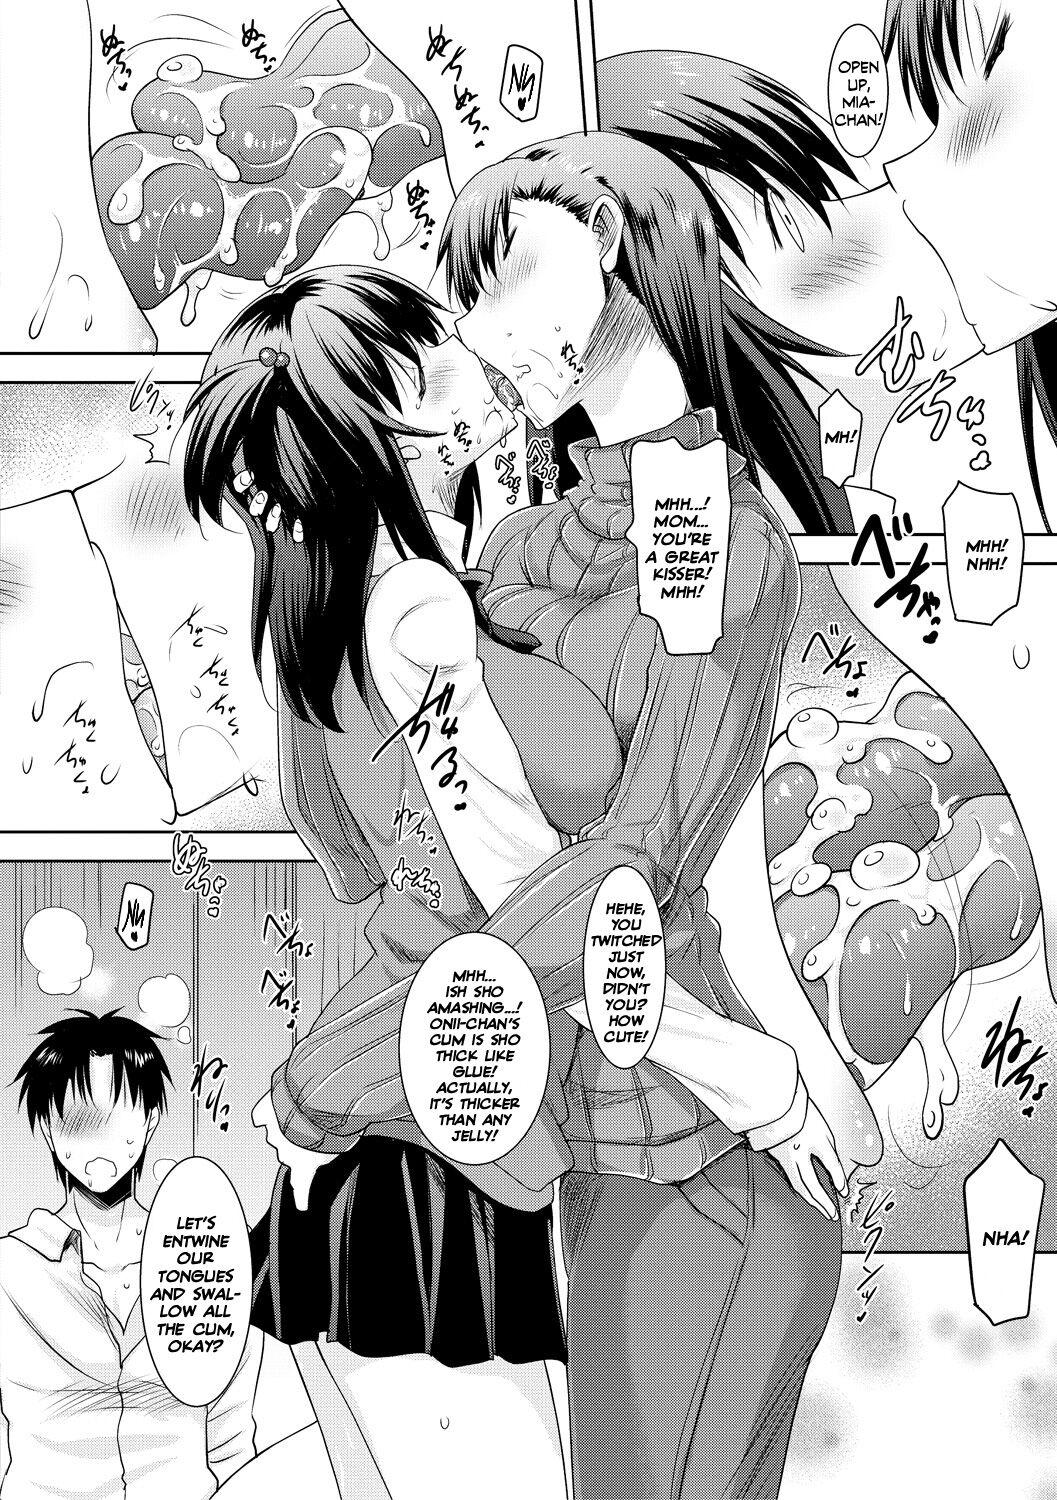 [Pony-R] I Can't Live Without My Little Sister's Tongue Chapter 01-02 + Secret Baby-making Sex with a Big-titted Mother and Daughter! (Kyonyuu Oyako no Shita to Shikyuu ni Renzoku Shasei) [English] [Team Rabu2] [Digital] 56